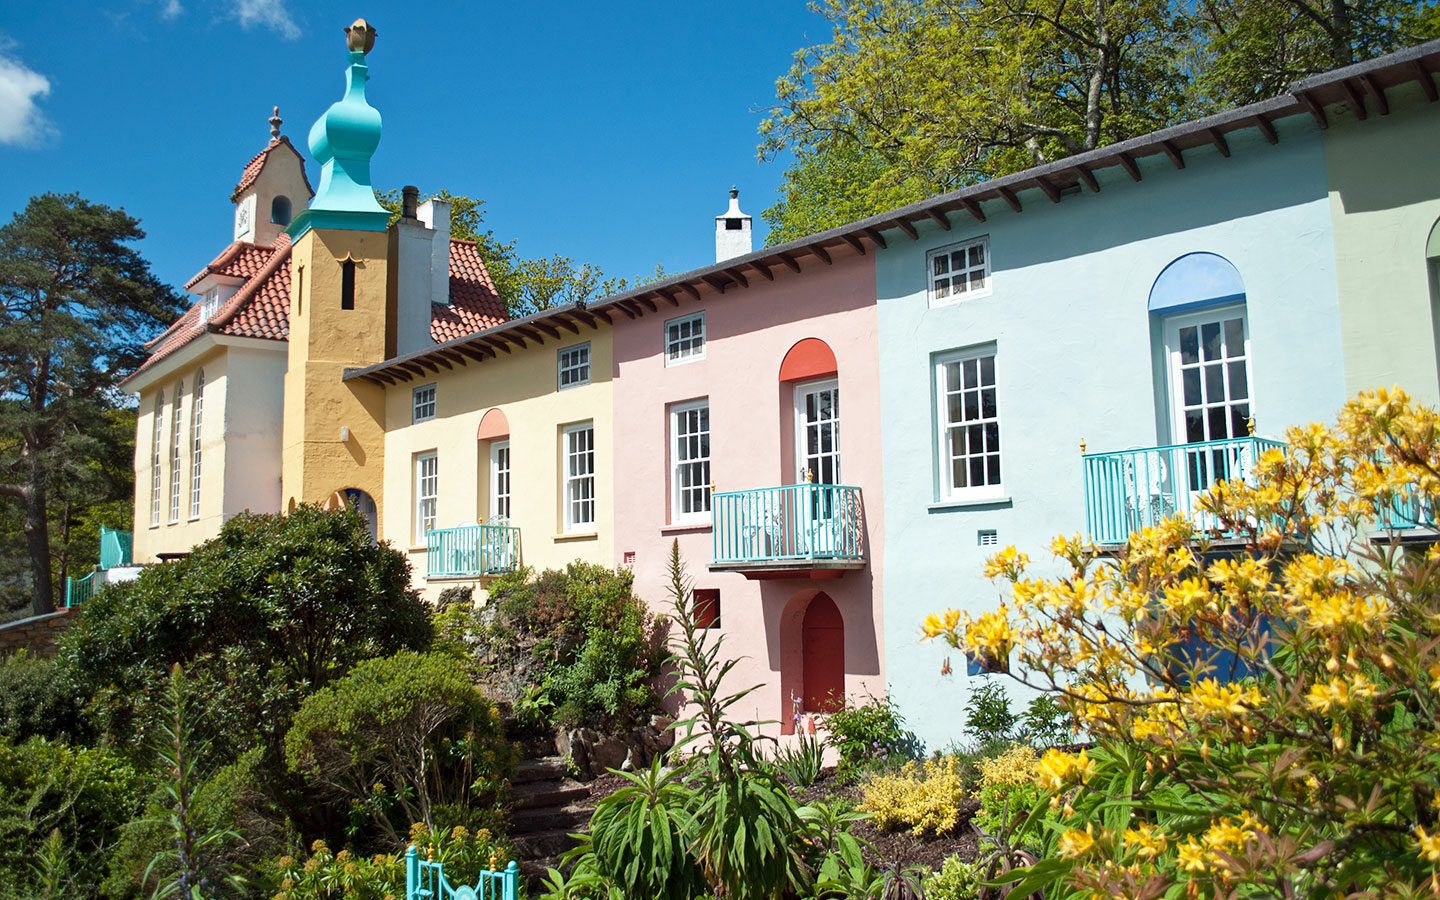 Colourful buildings in the the Italian-style village of Portmeirion in North Wales